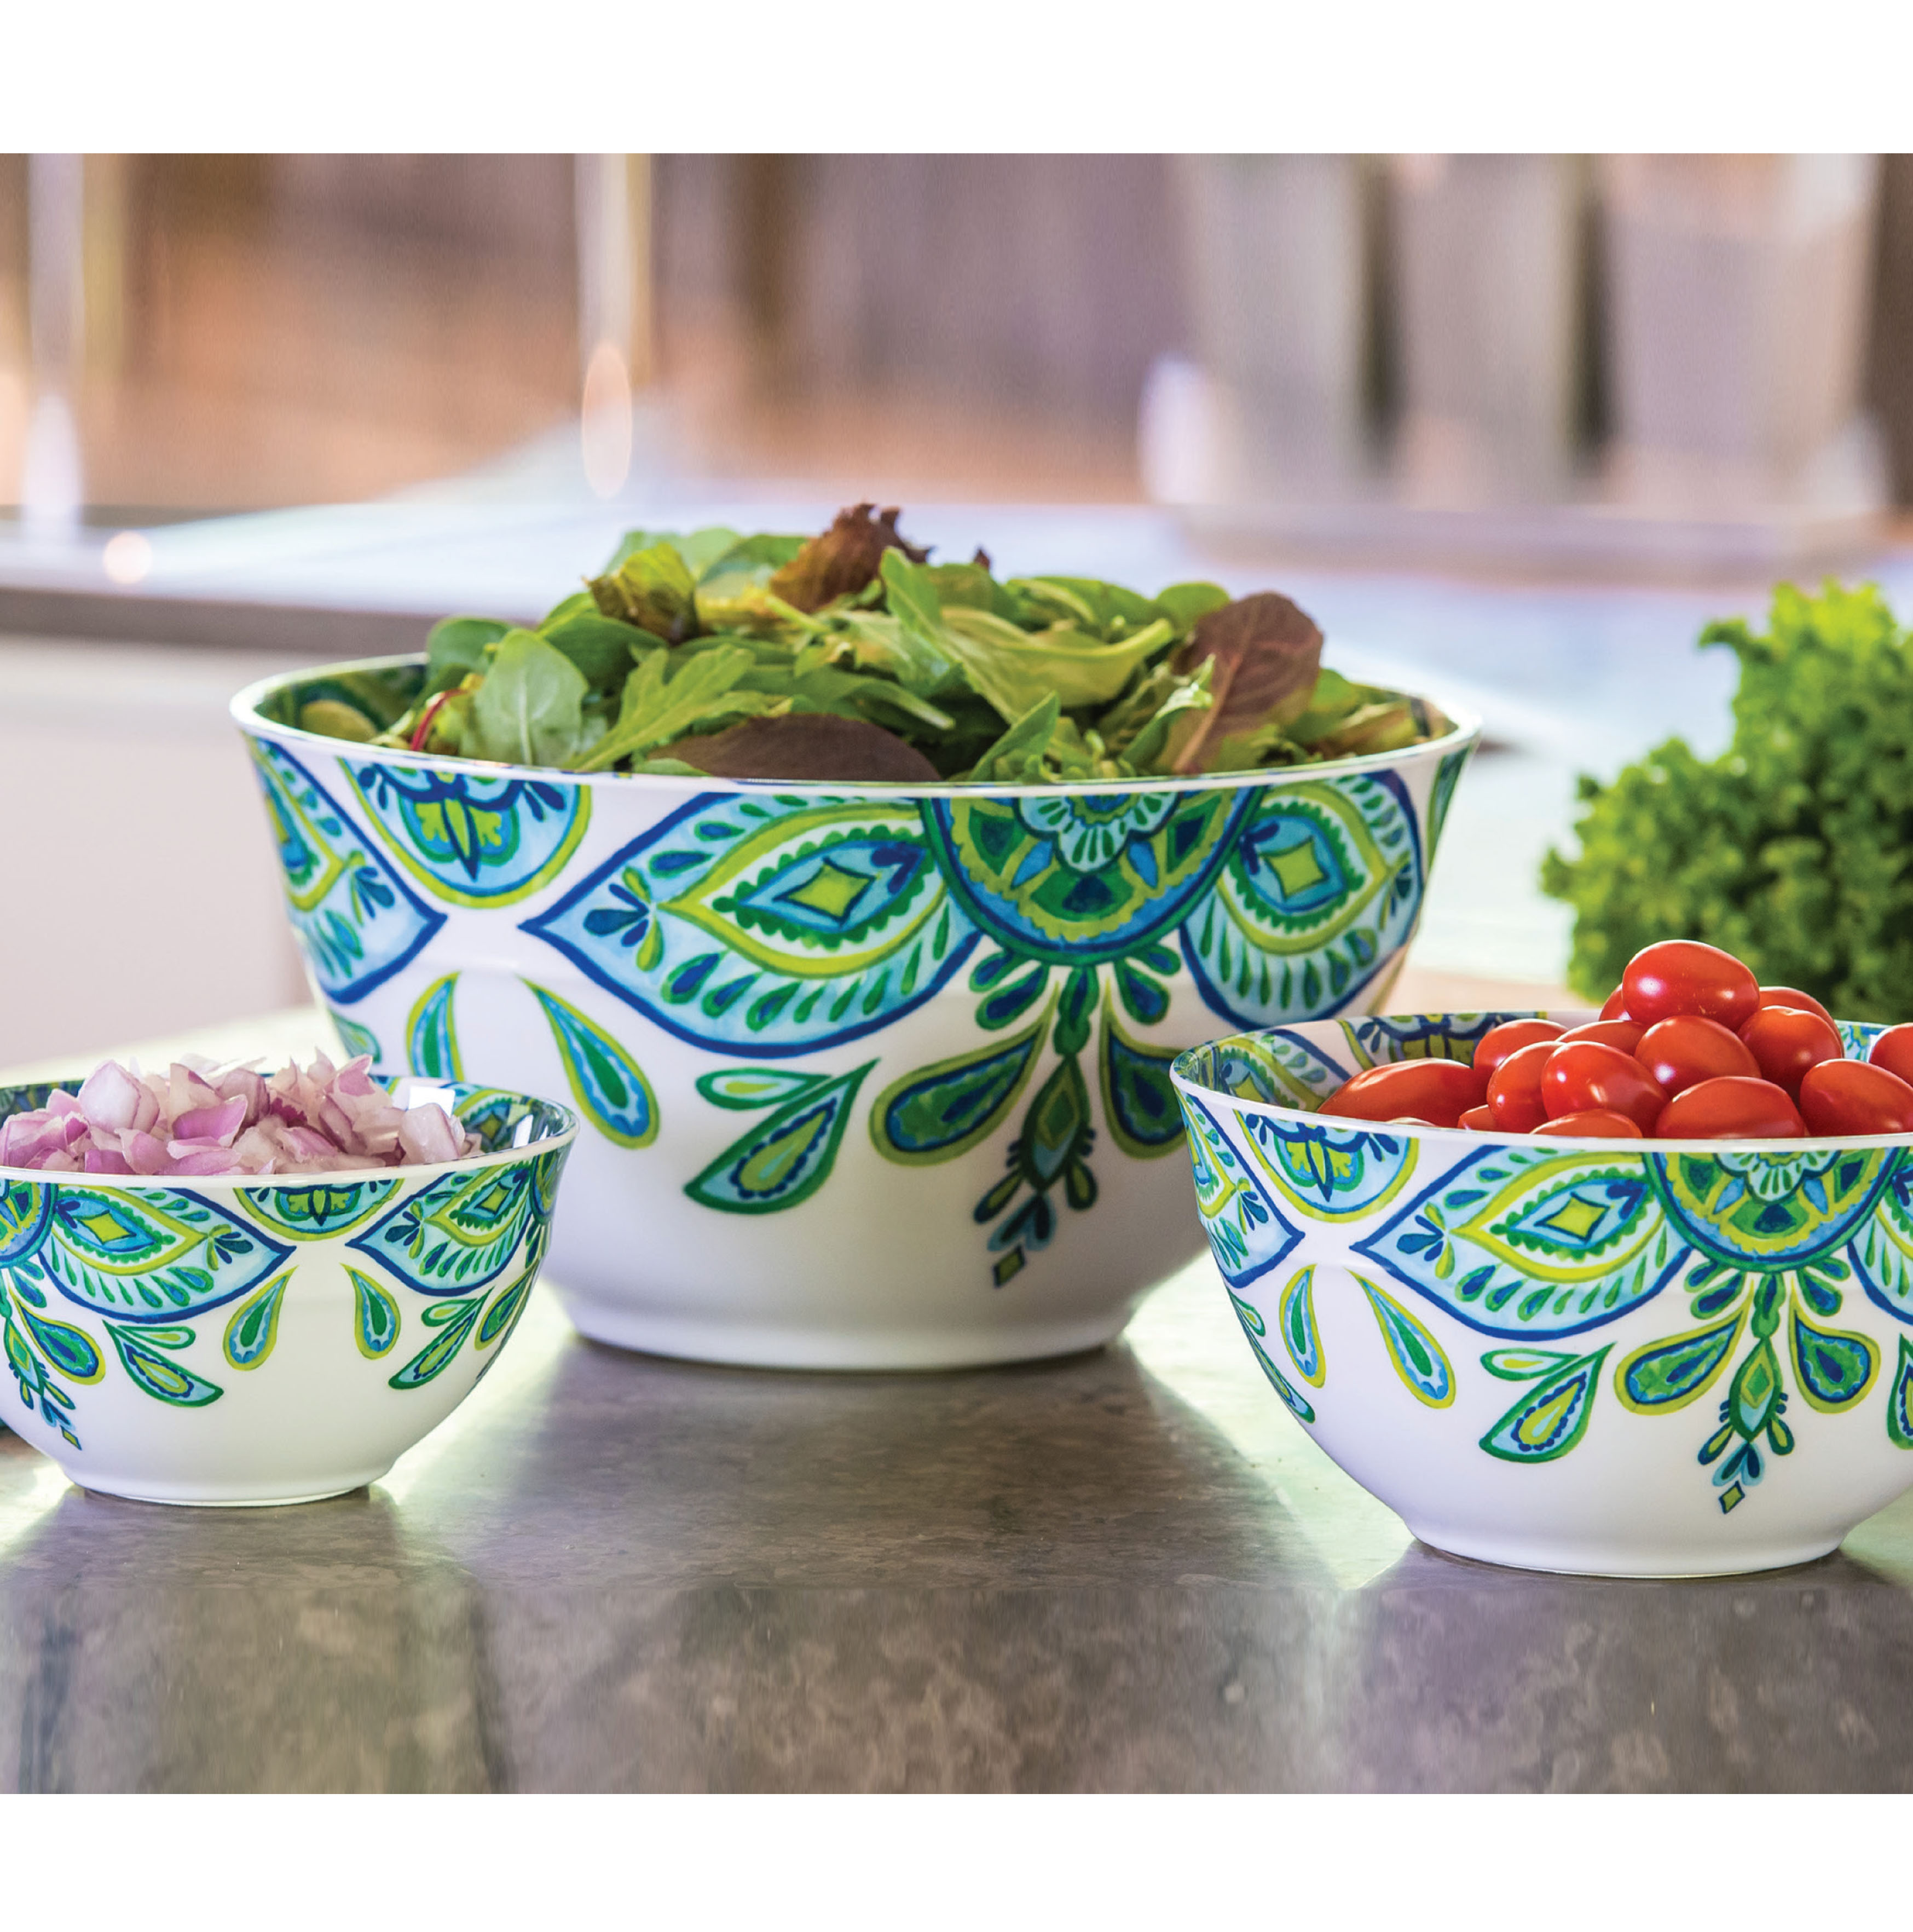 10 Piece Melamine Mixing Bowl Set with Lids, Green and Blue Floral - image 2 of 8